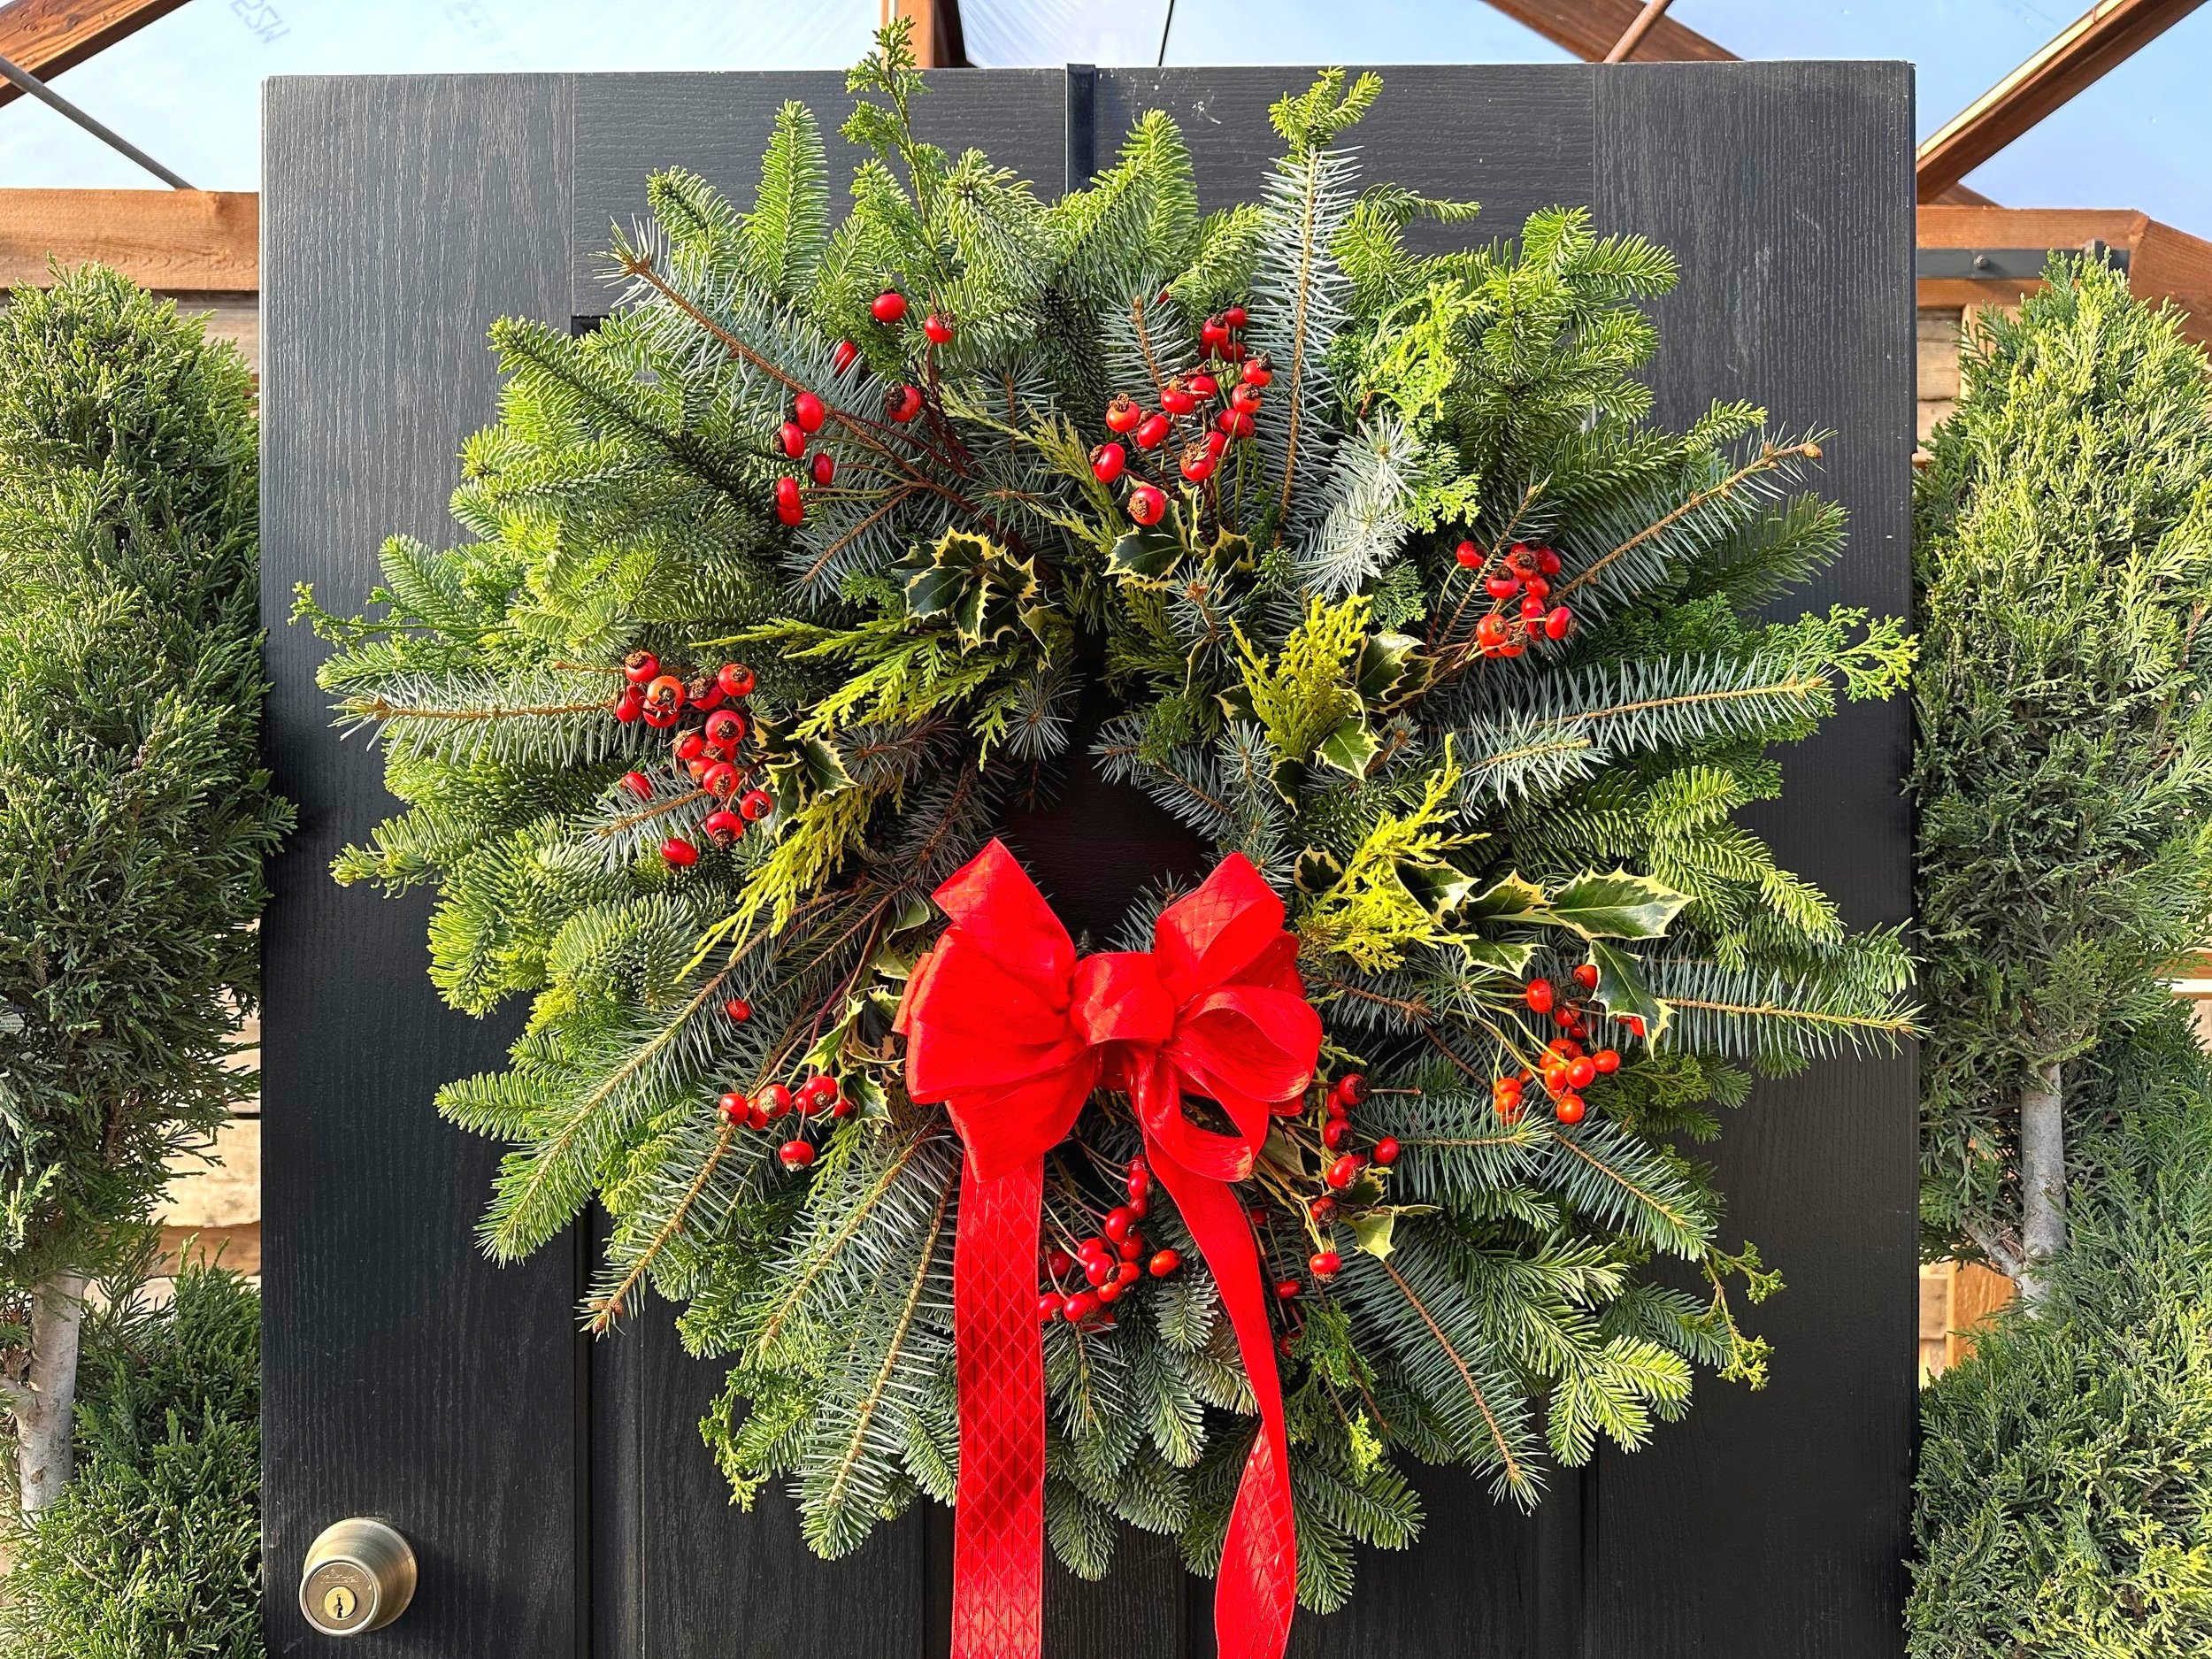 Wreath+%232+with+red+bow2.jpg